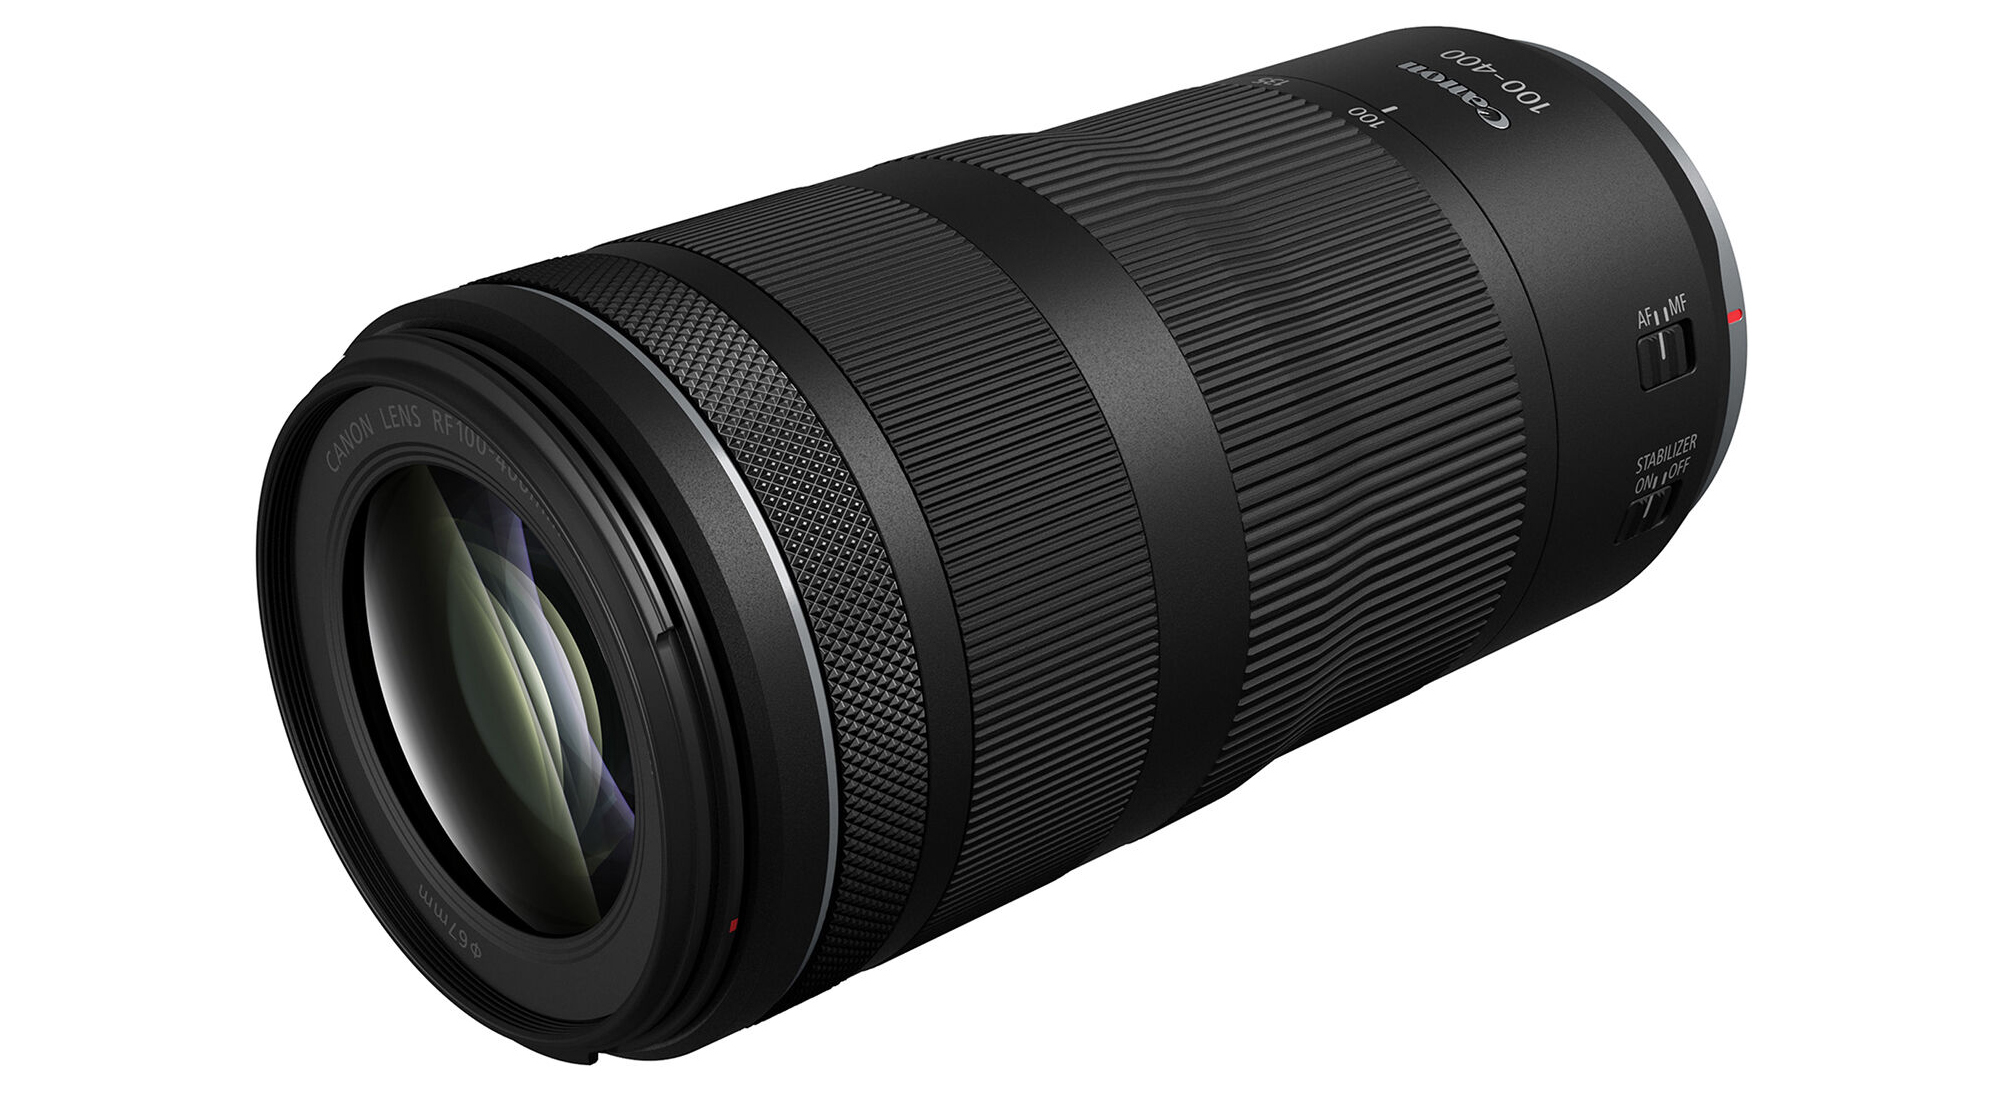 Photo of the Canon RF100-400mm F5.6-8 IS USM